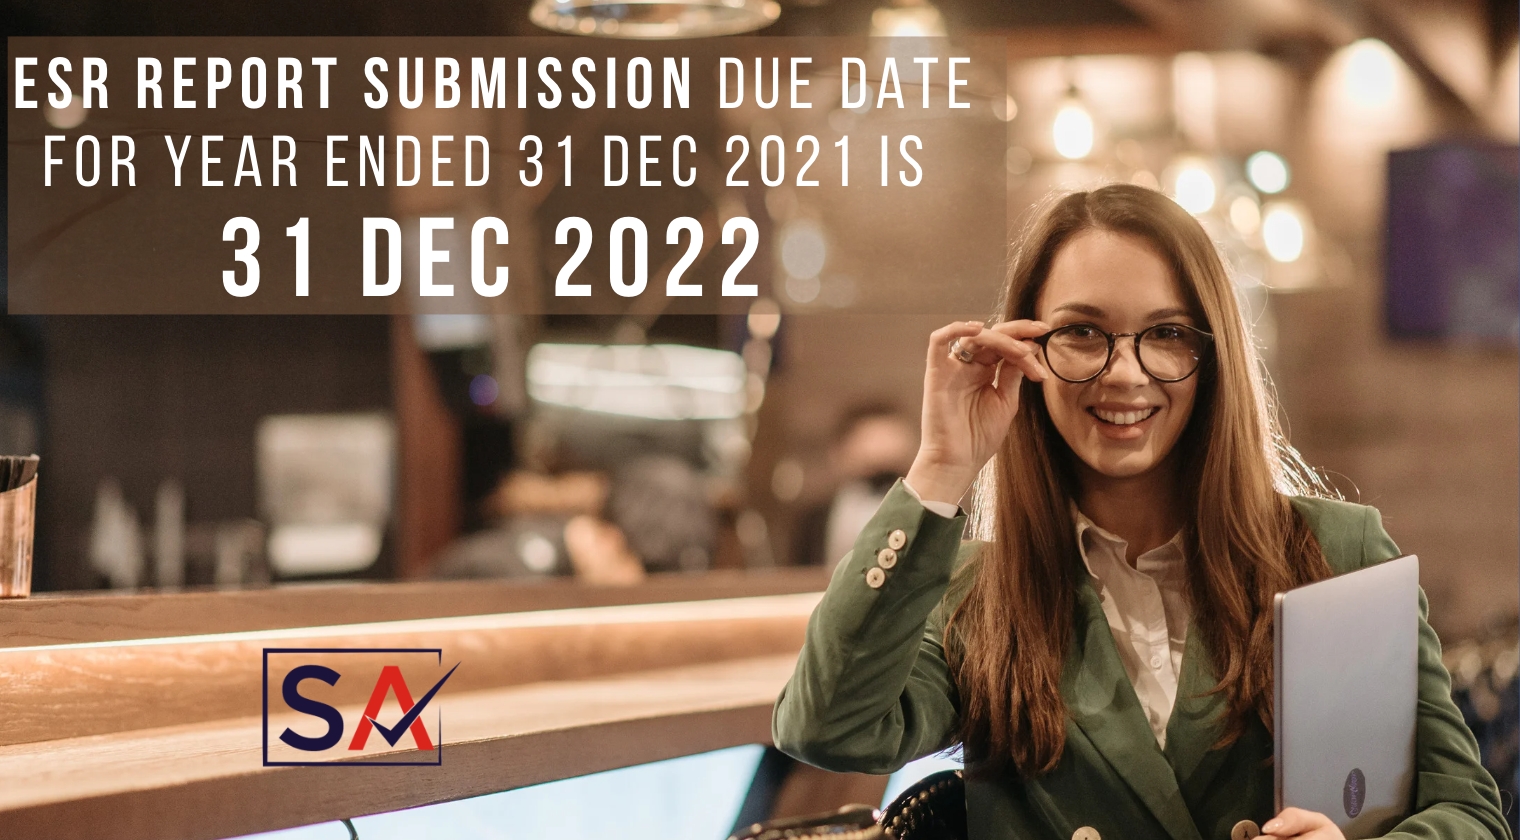 ESR report Submission due date for year ended 31 dec 2021 is 31 Dec 2022